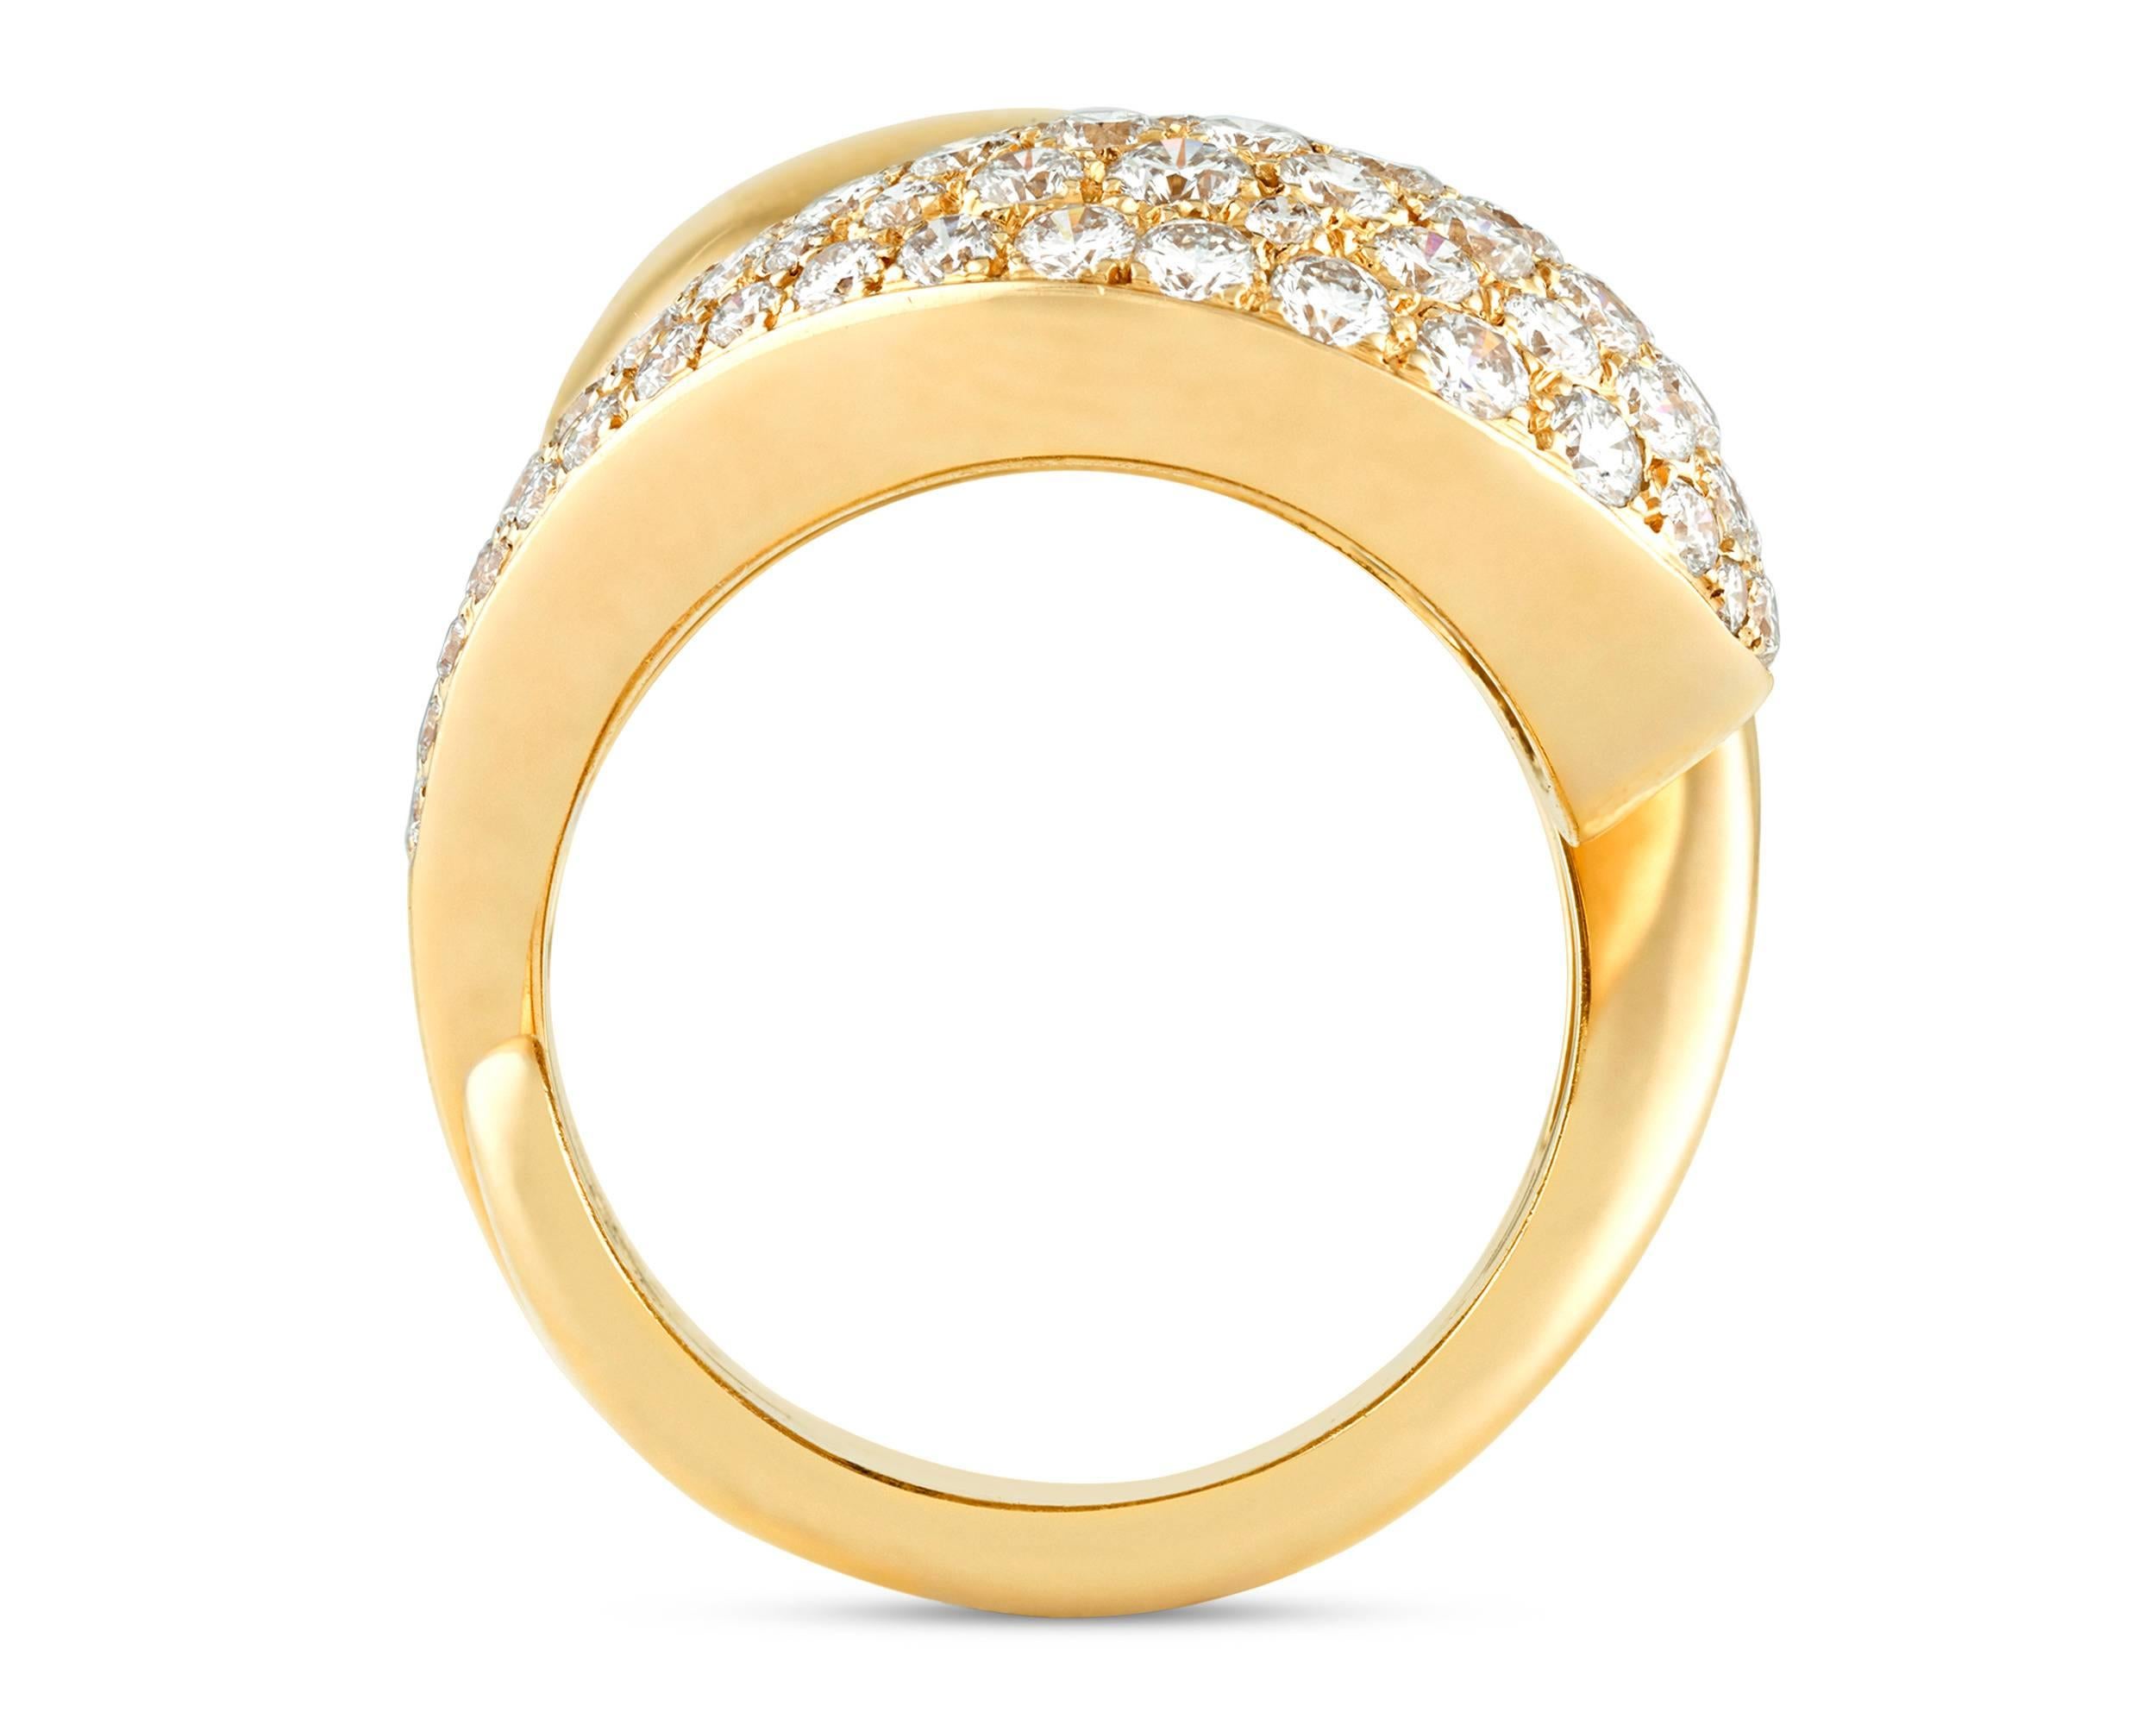 An incredible contemporary design by the legendary Cartier sets apart this exceptional crossover ring. Crafted of 18k yellow gold, the piece is designed as two curved, bombe sections in symmetrical opposition, with one side pavé set with